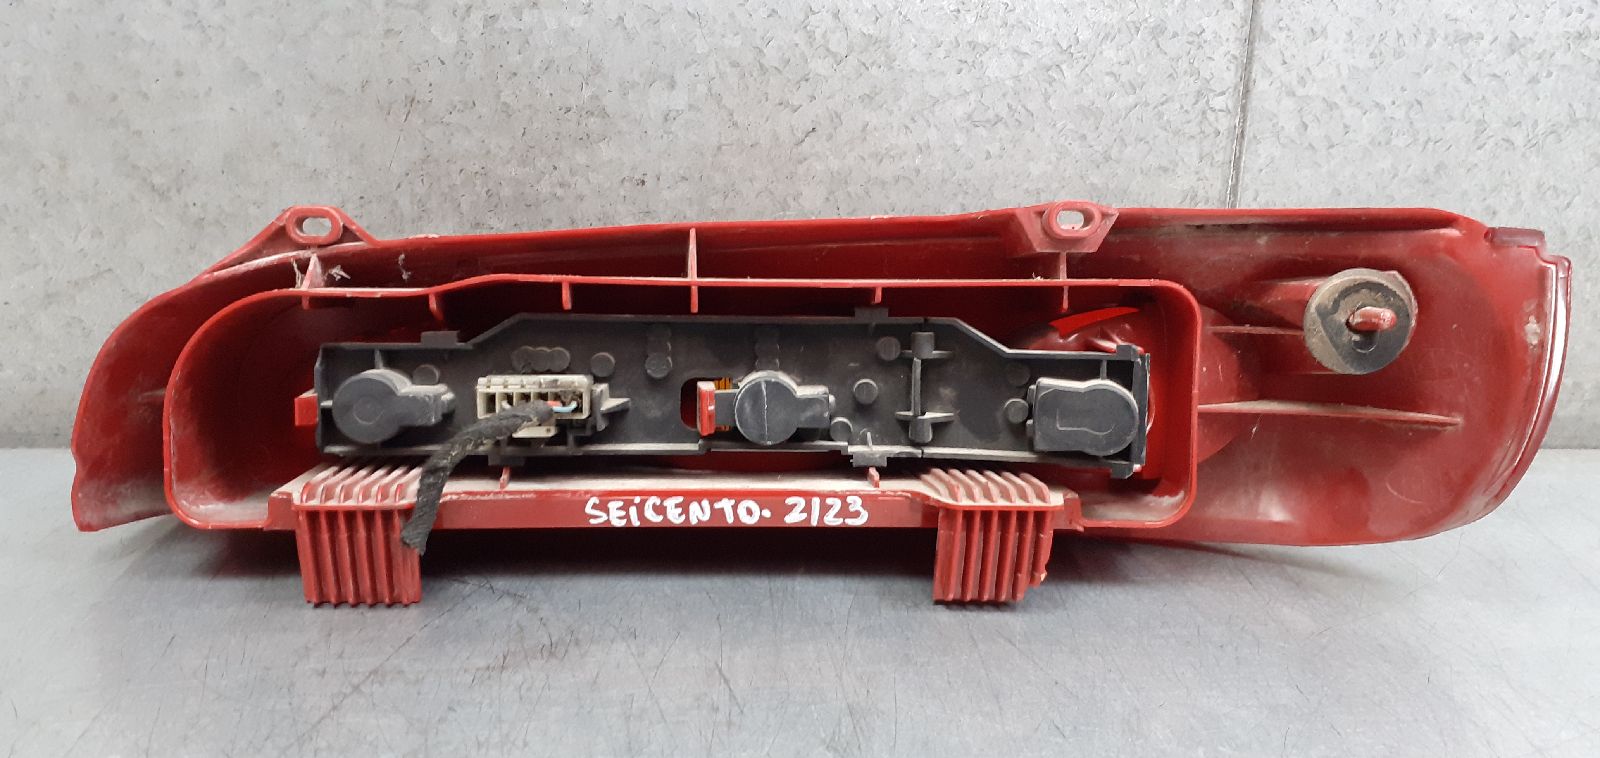 RENAULT Seicento 1 generation (1998-2010) Rear Left Taillight 39670748 21976937